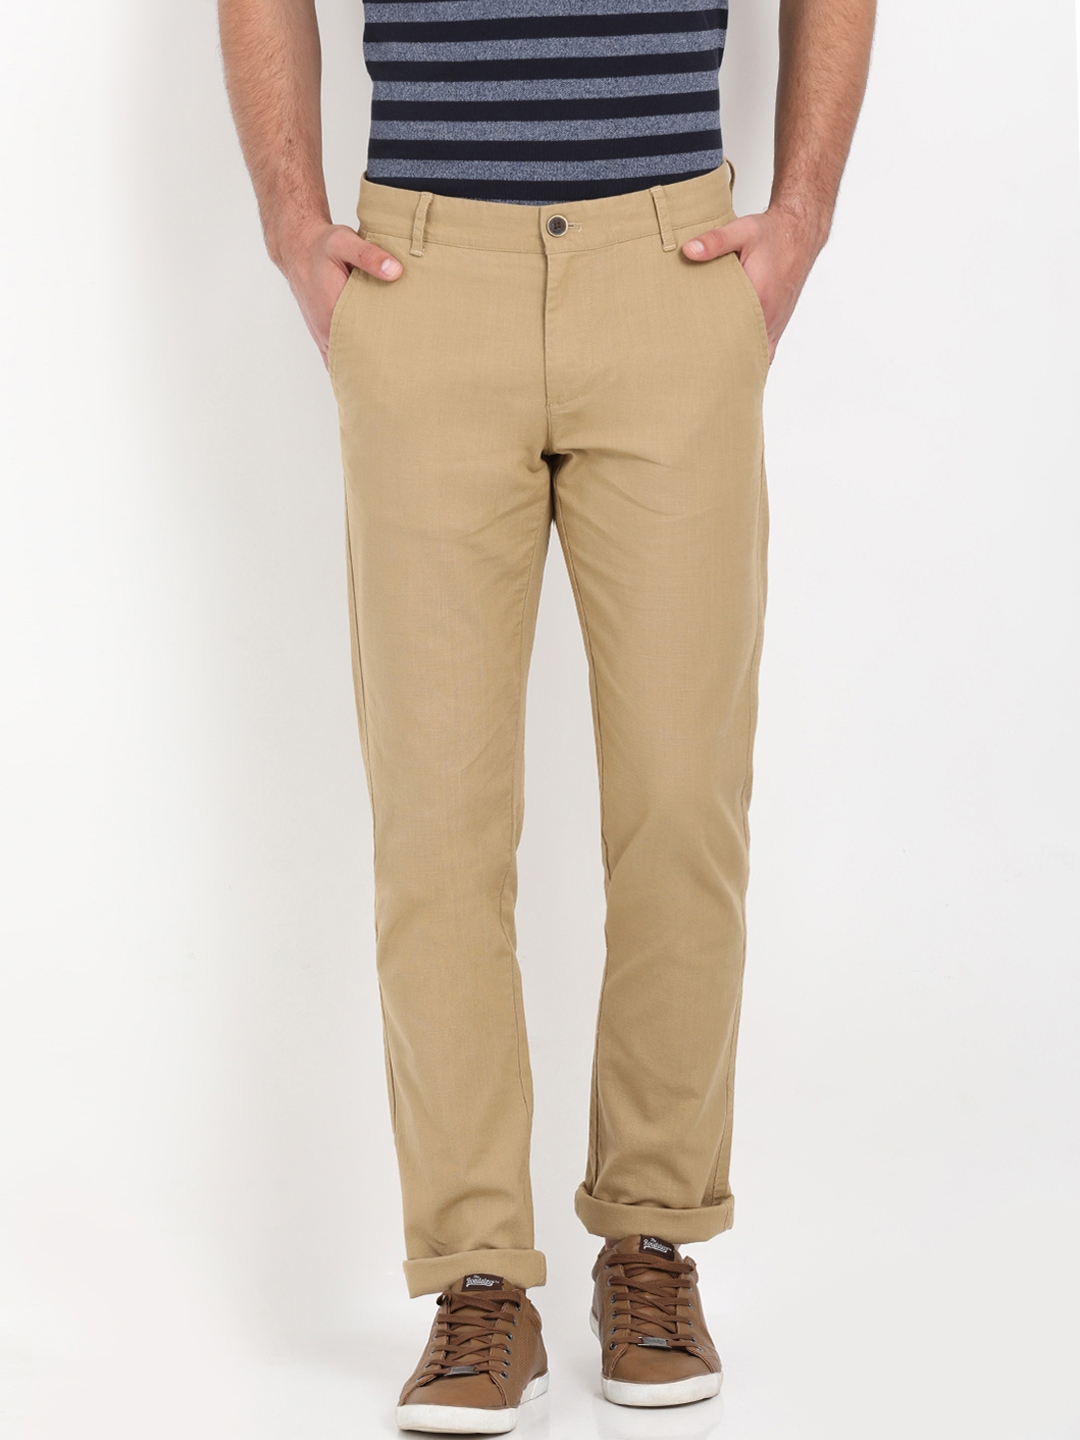 Shop Trendy Cargos for Men and Women Online at Low Prices